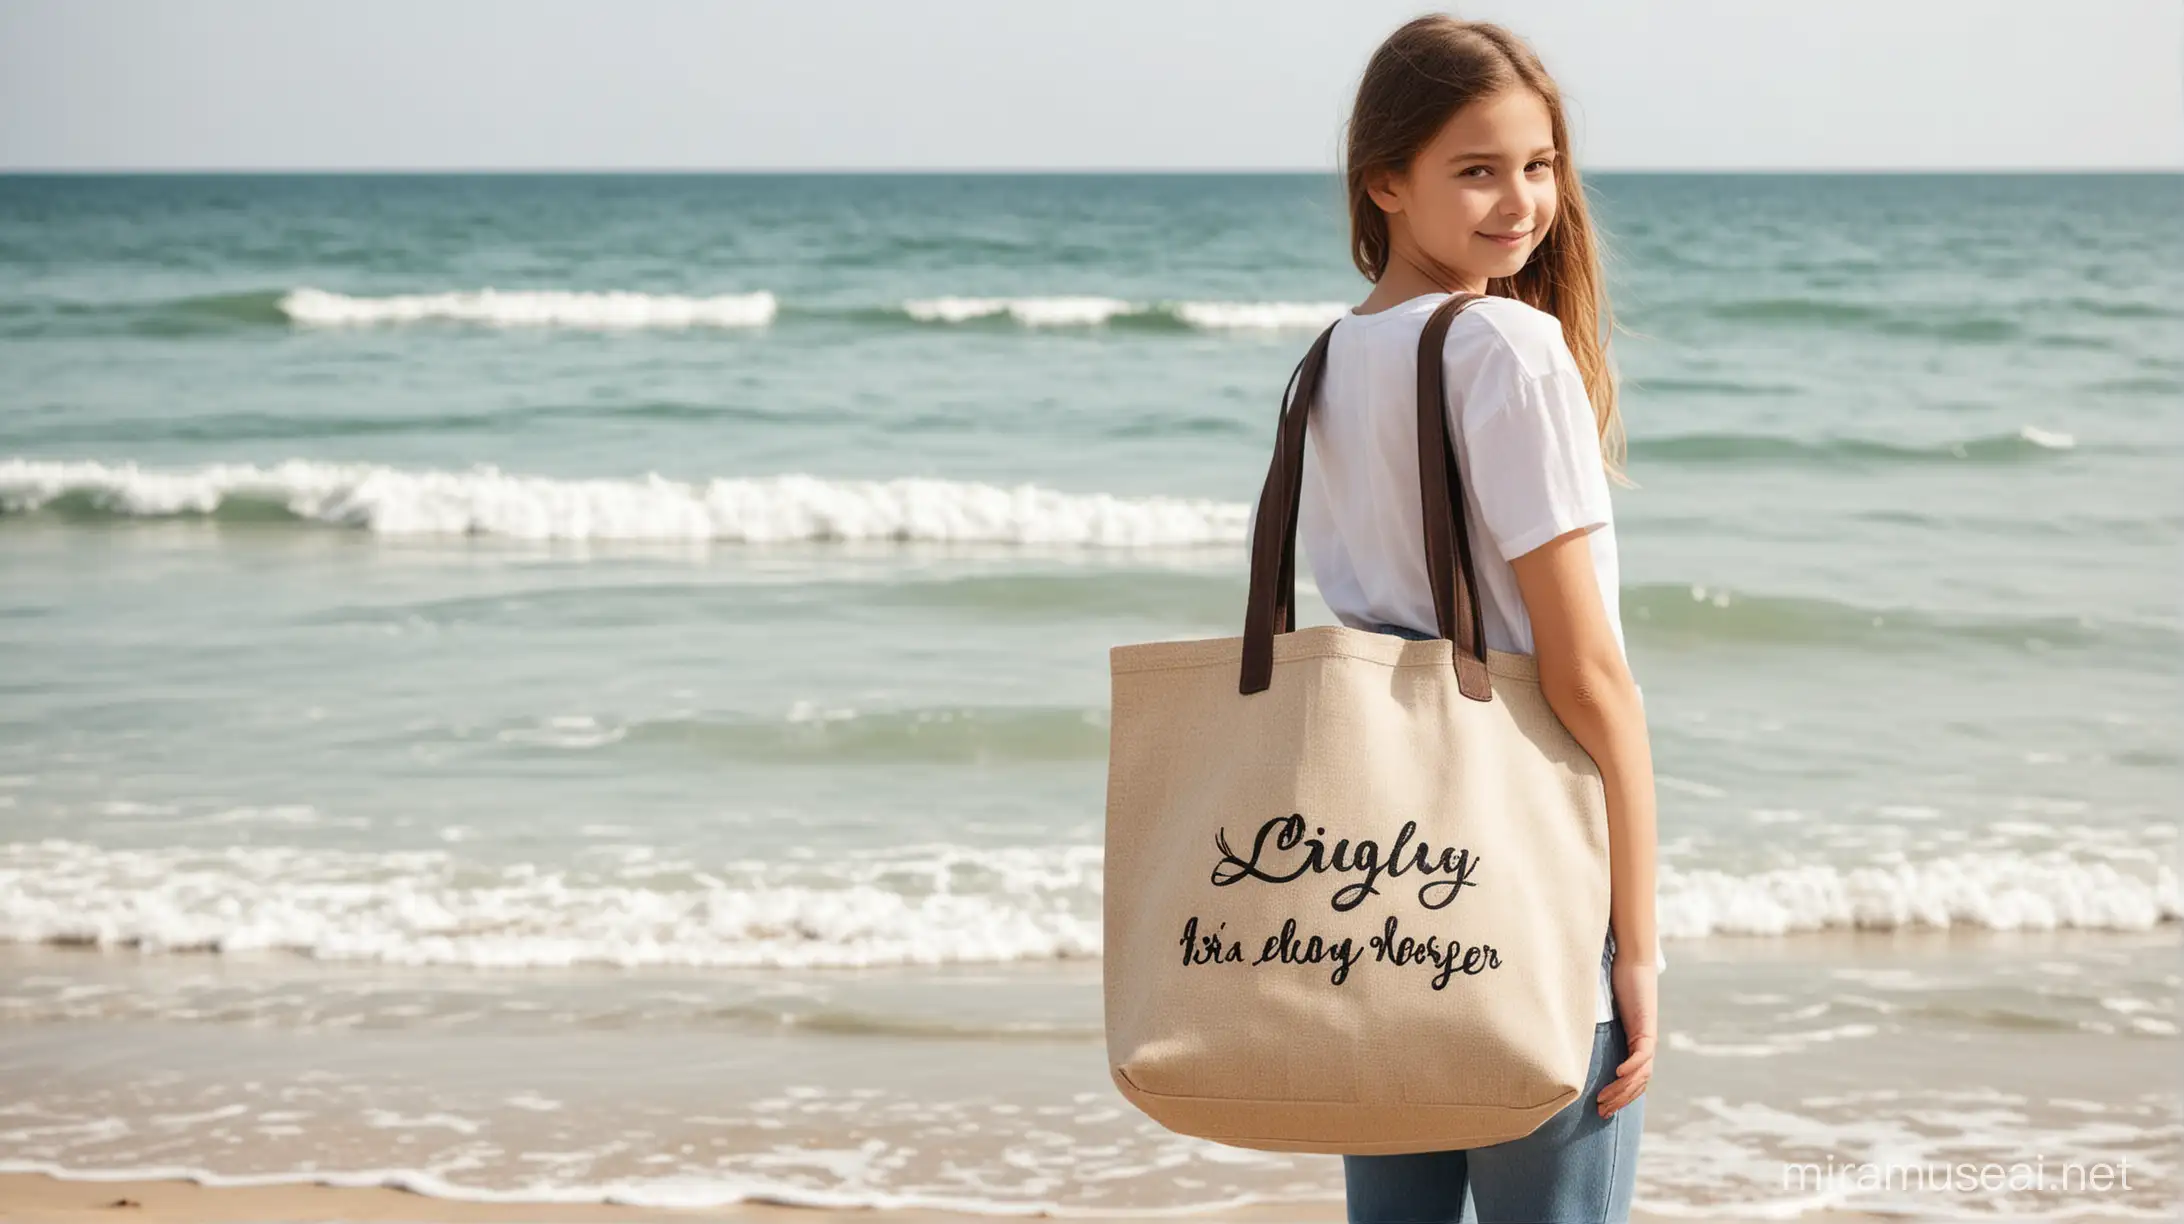 Young Girl Carrying Tote Bag on Beach by the Sea Photo Mockup